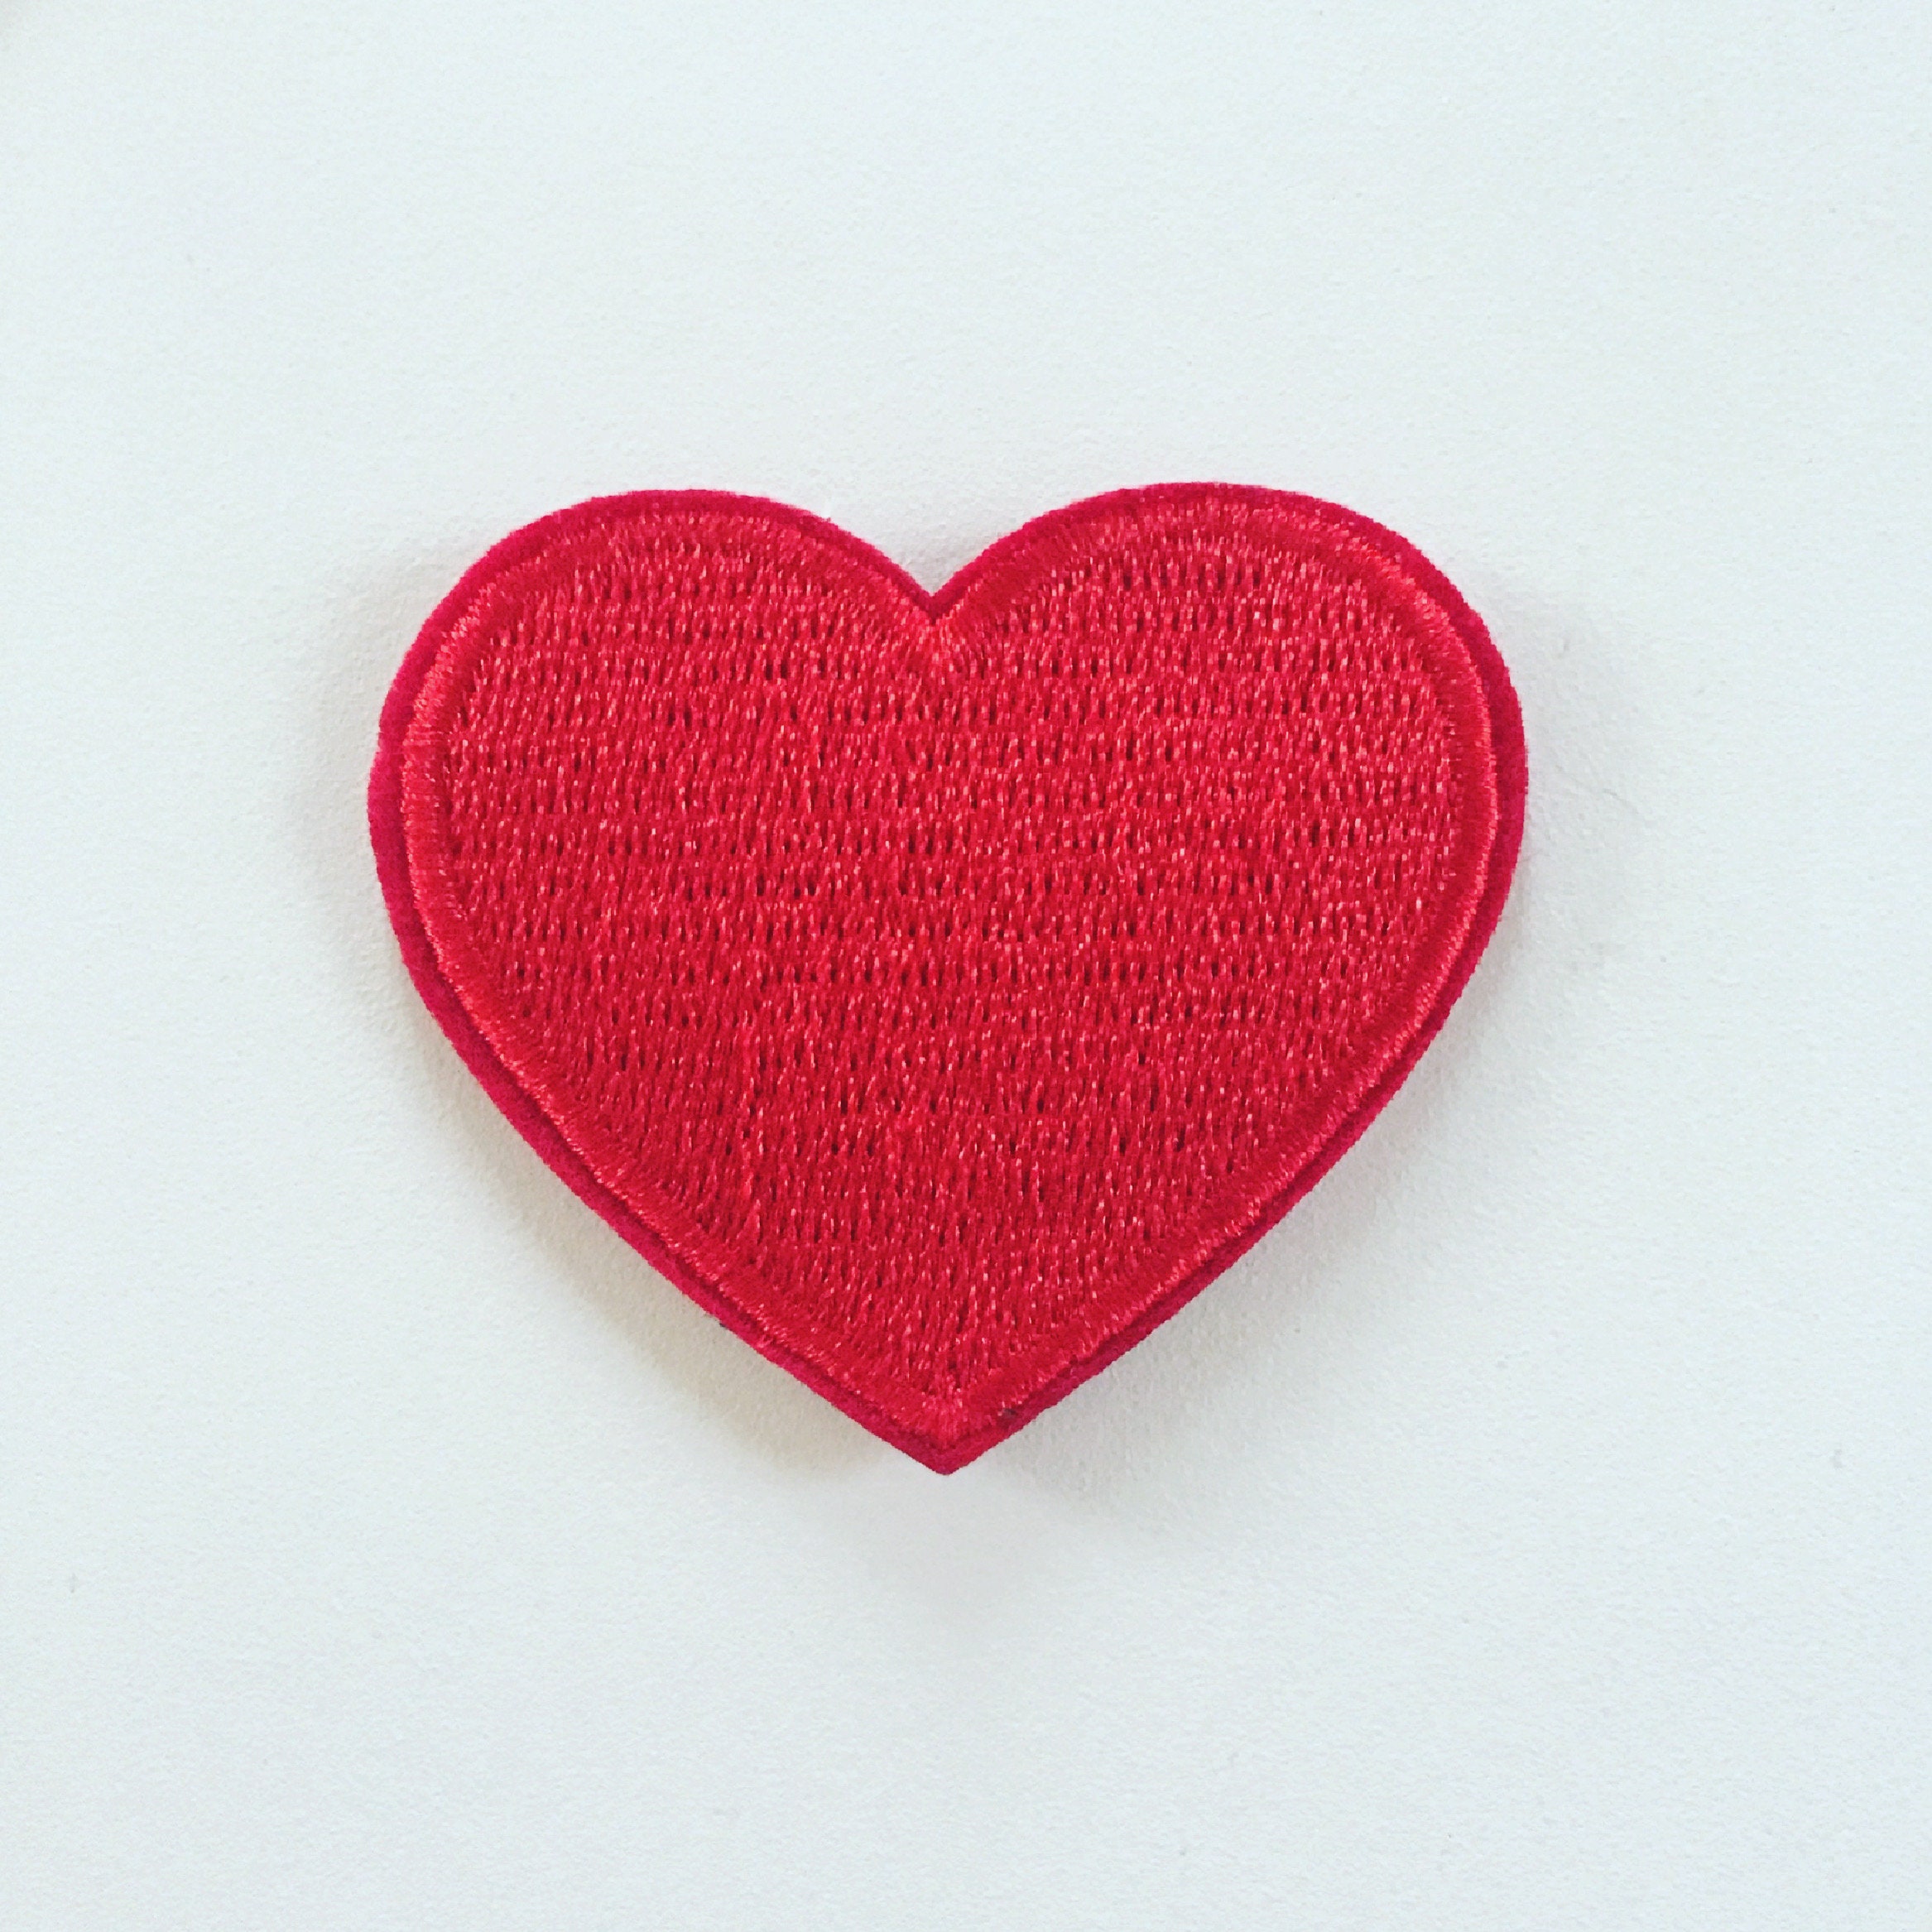 Medium Red Heart Iron-On Patch, Red Heart Badge, 90s Girly Badge, DIY  Embroidery, Embroidered Heart Applique, Pop Culture Patch